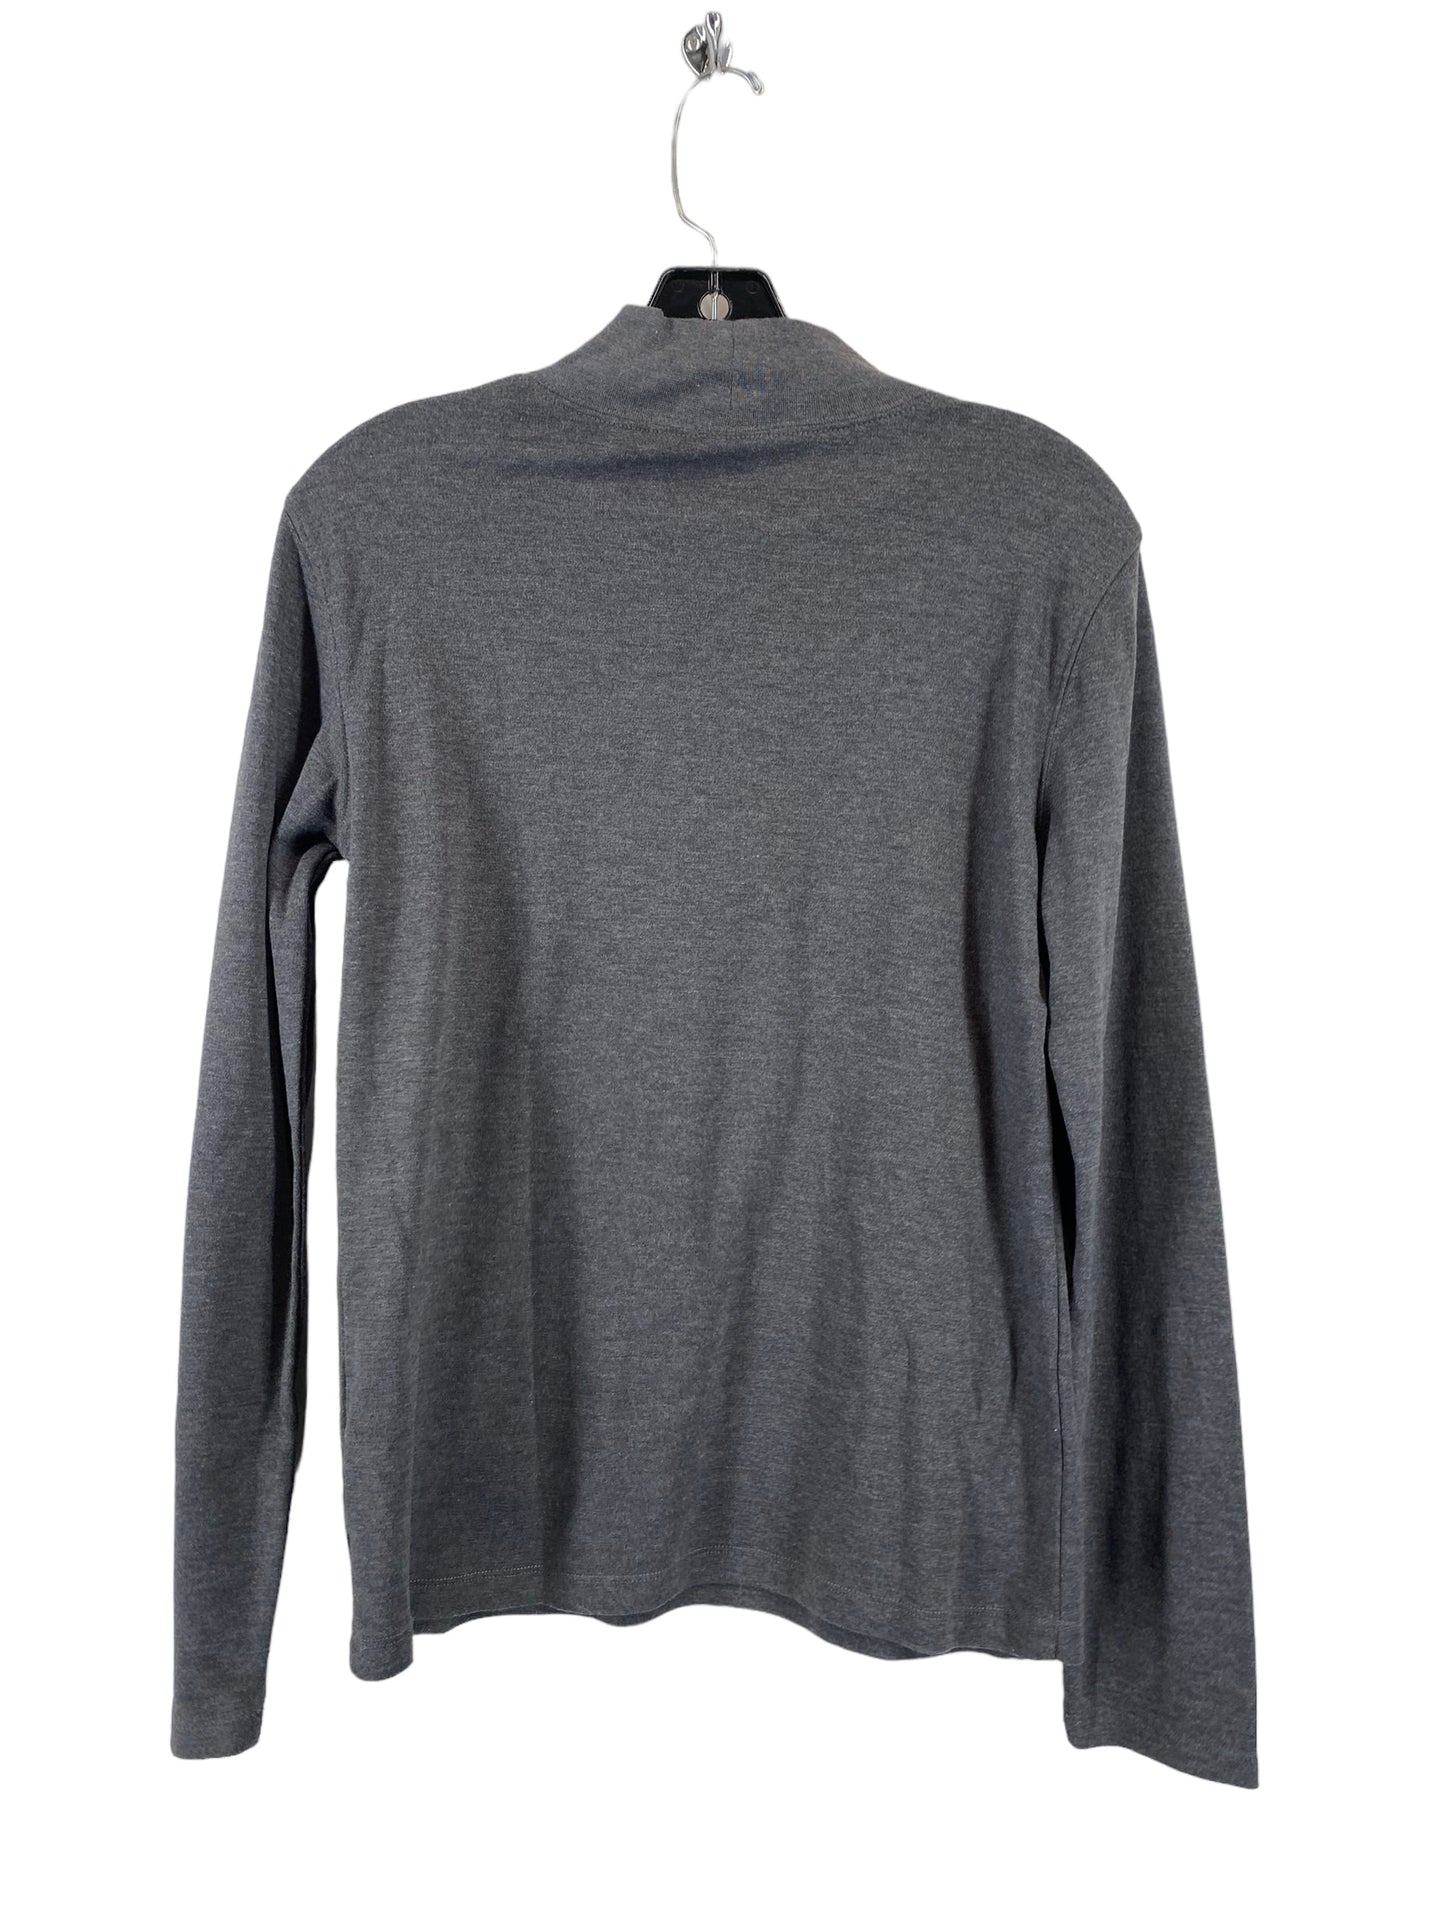 Top Long Sleeve Basic By St Johns Bay  Size: M